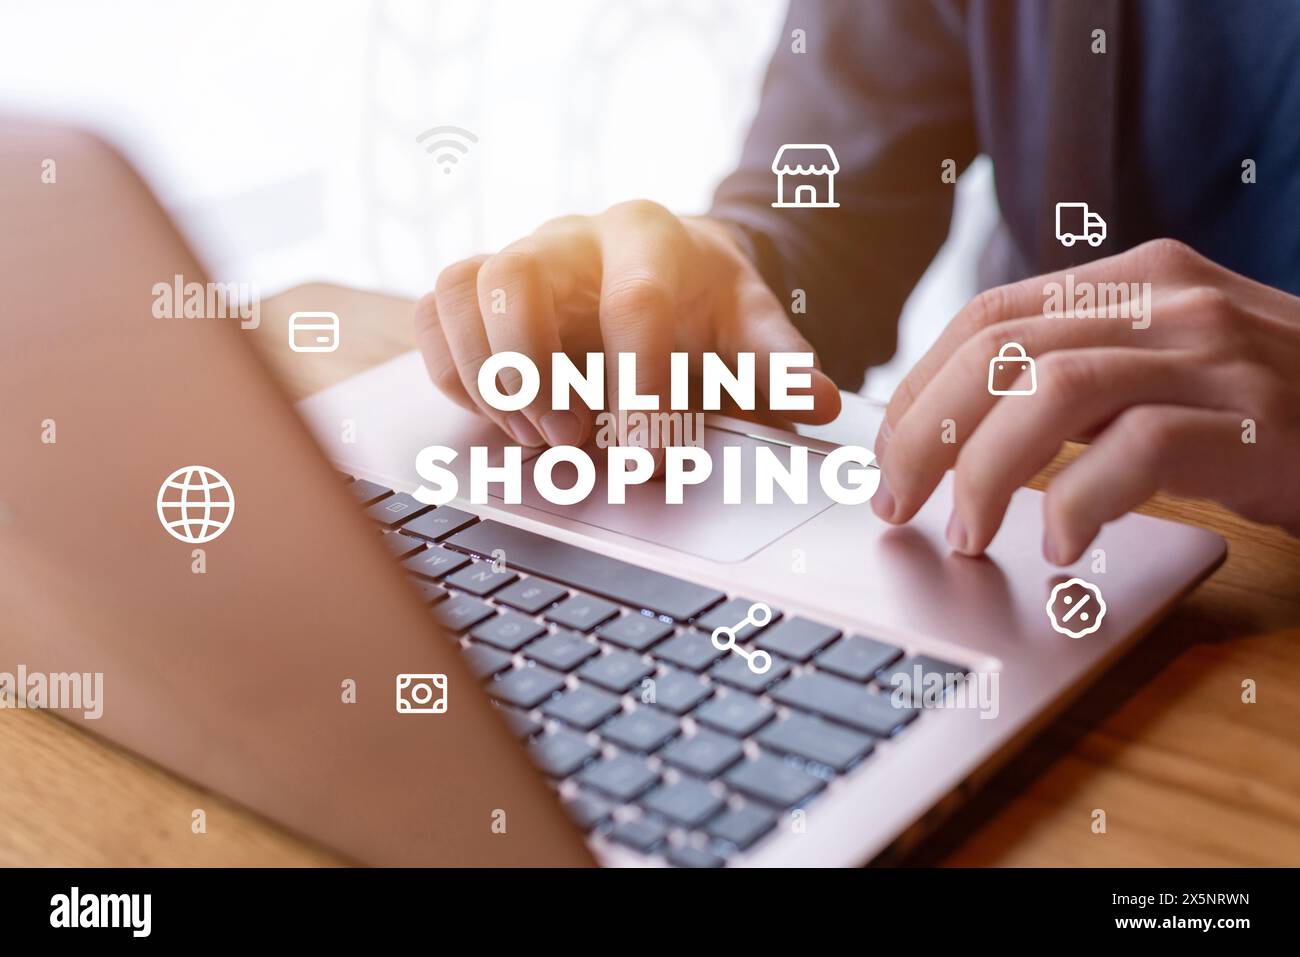 Man using laptop for online shopping with levitating icons and text. Modern e-commerce concept for digital consumer convenience Stock Photo